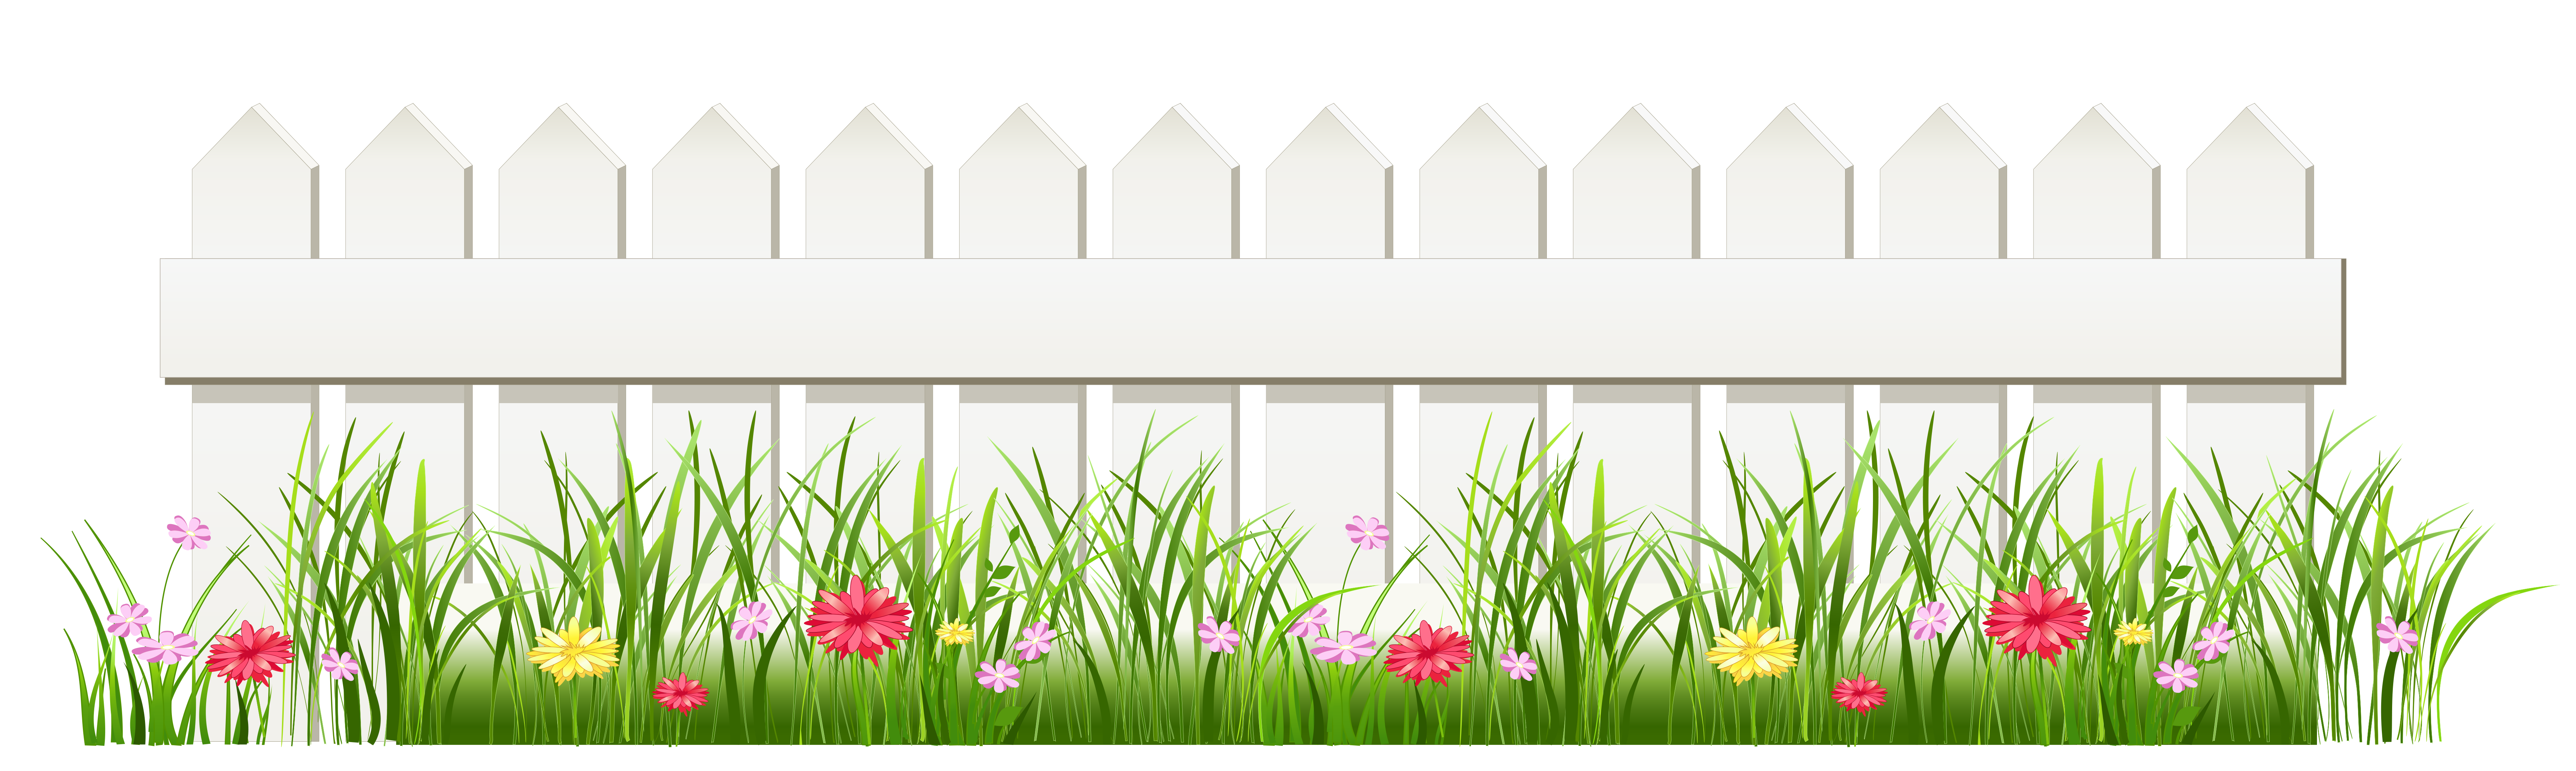 Grass clipart fence. Transparent white with png